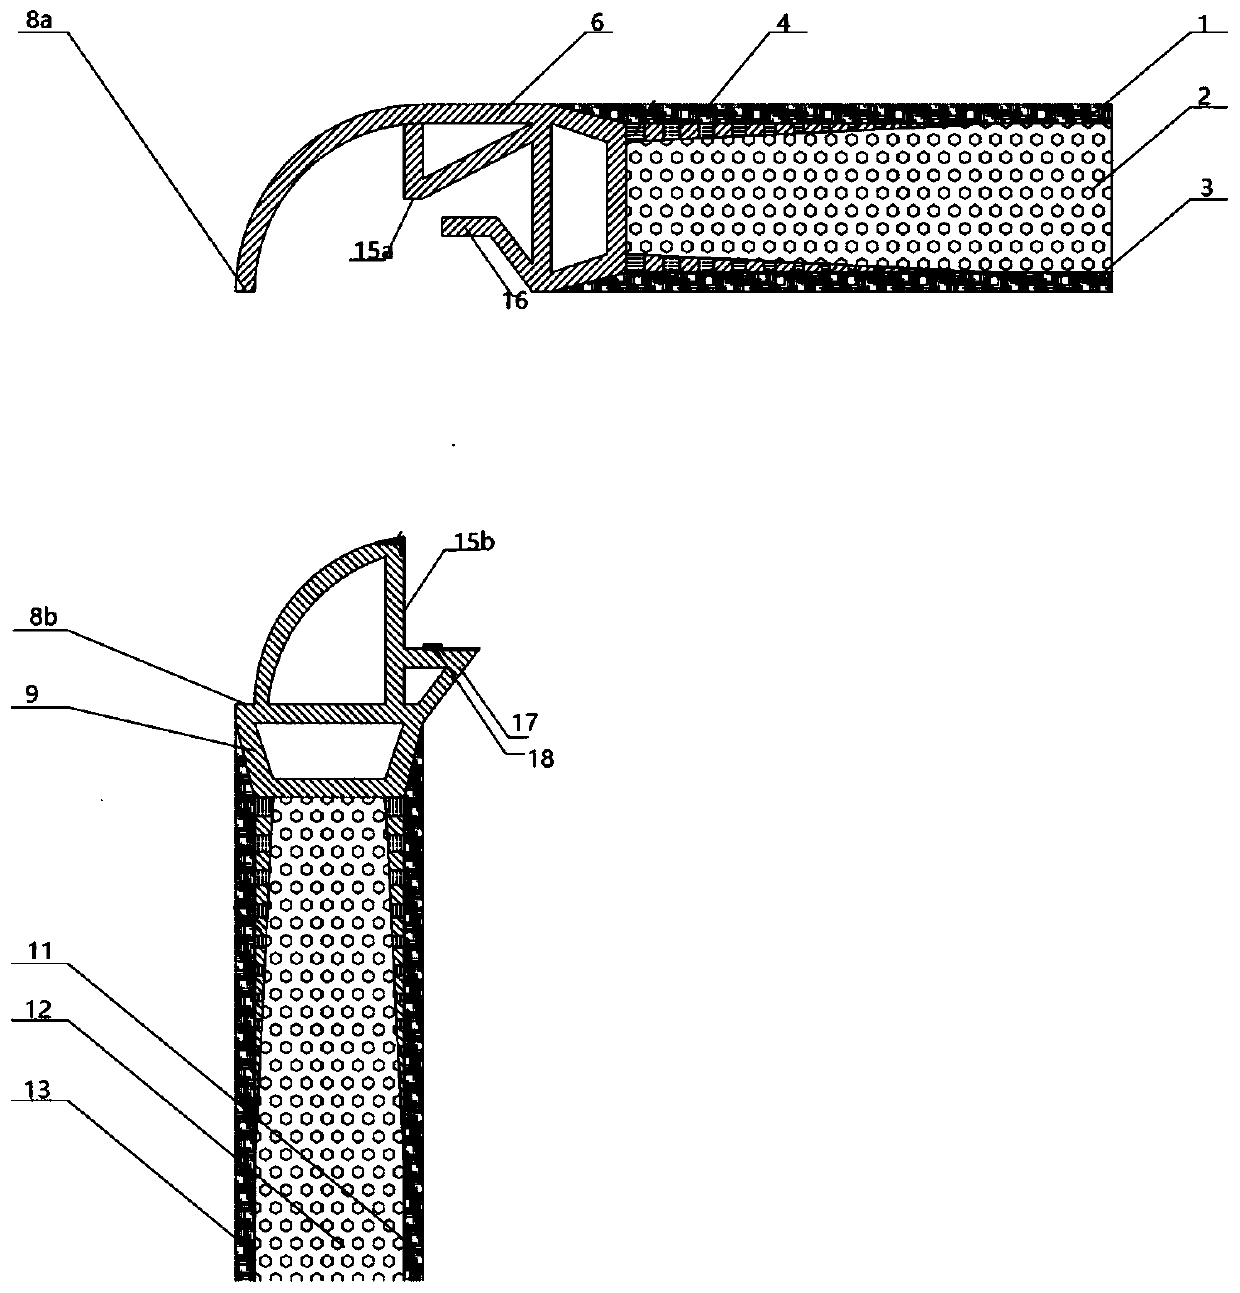 A connection structure of L-shaped composite sandwich panels with metal flexible joints